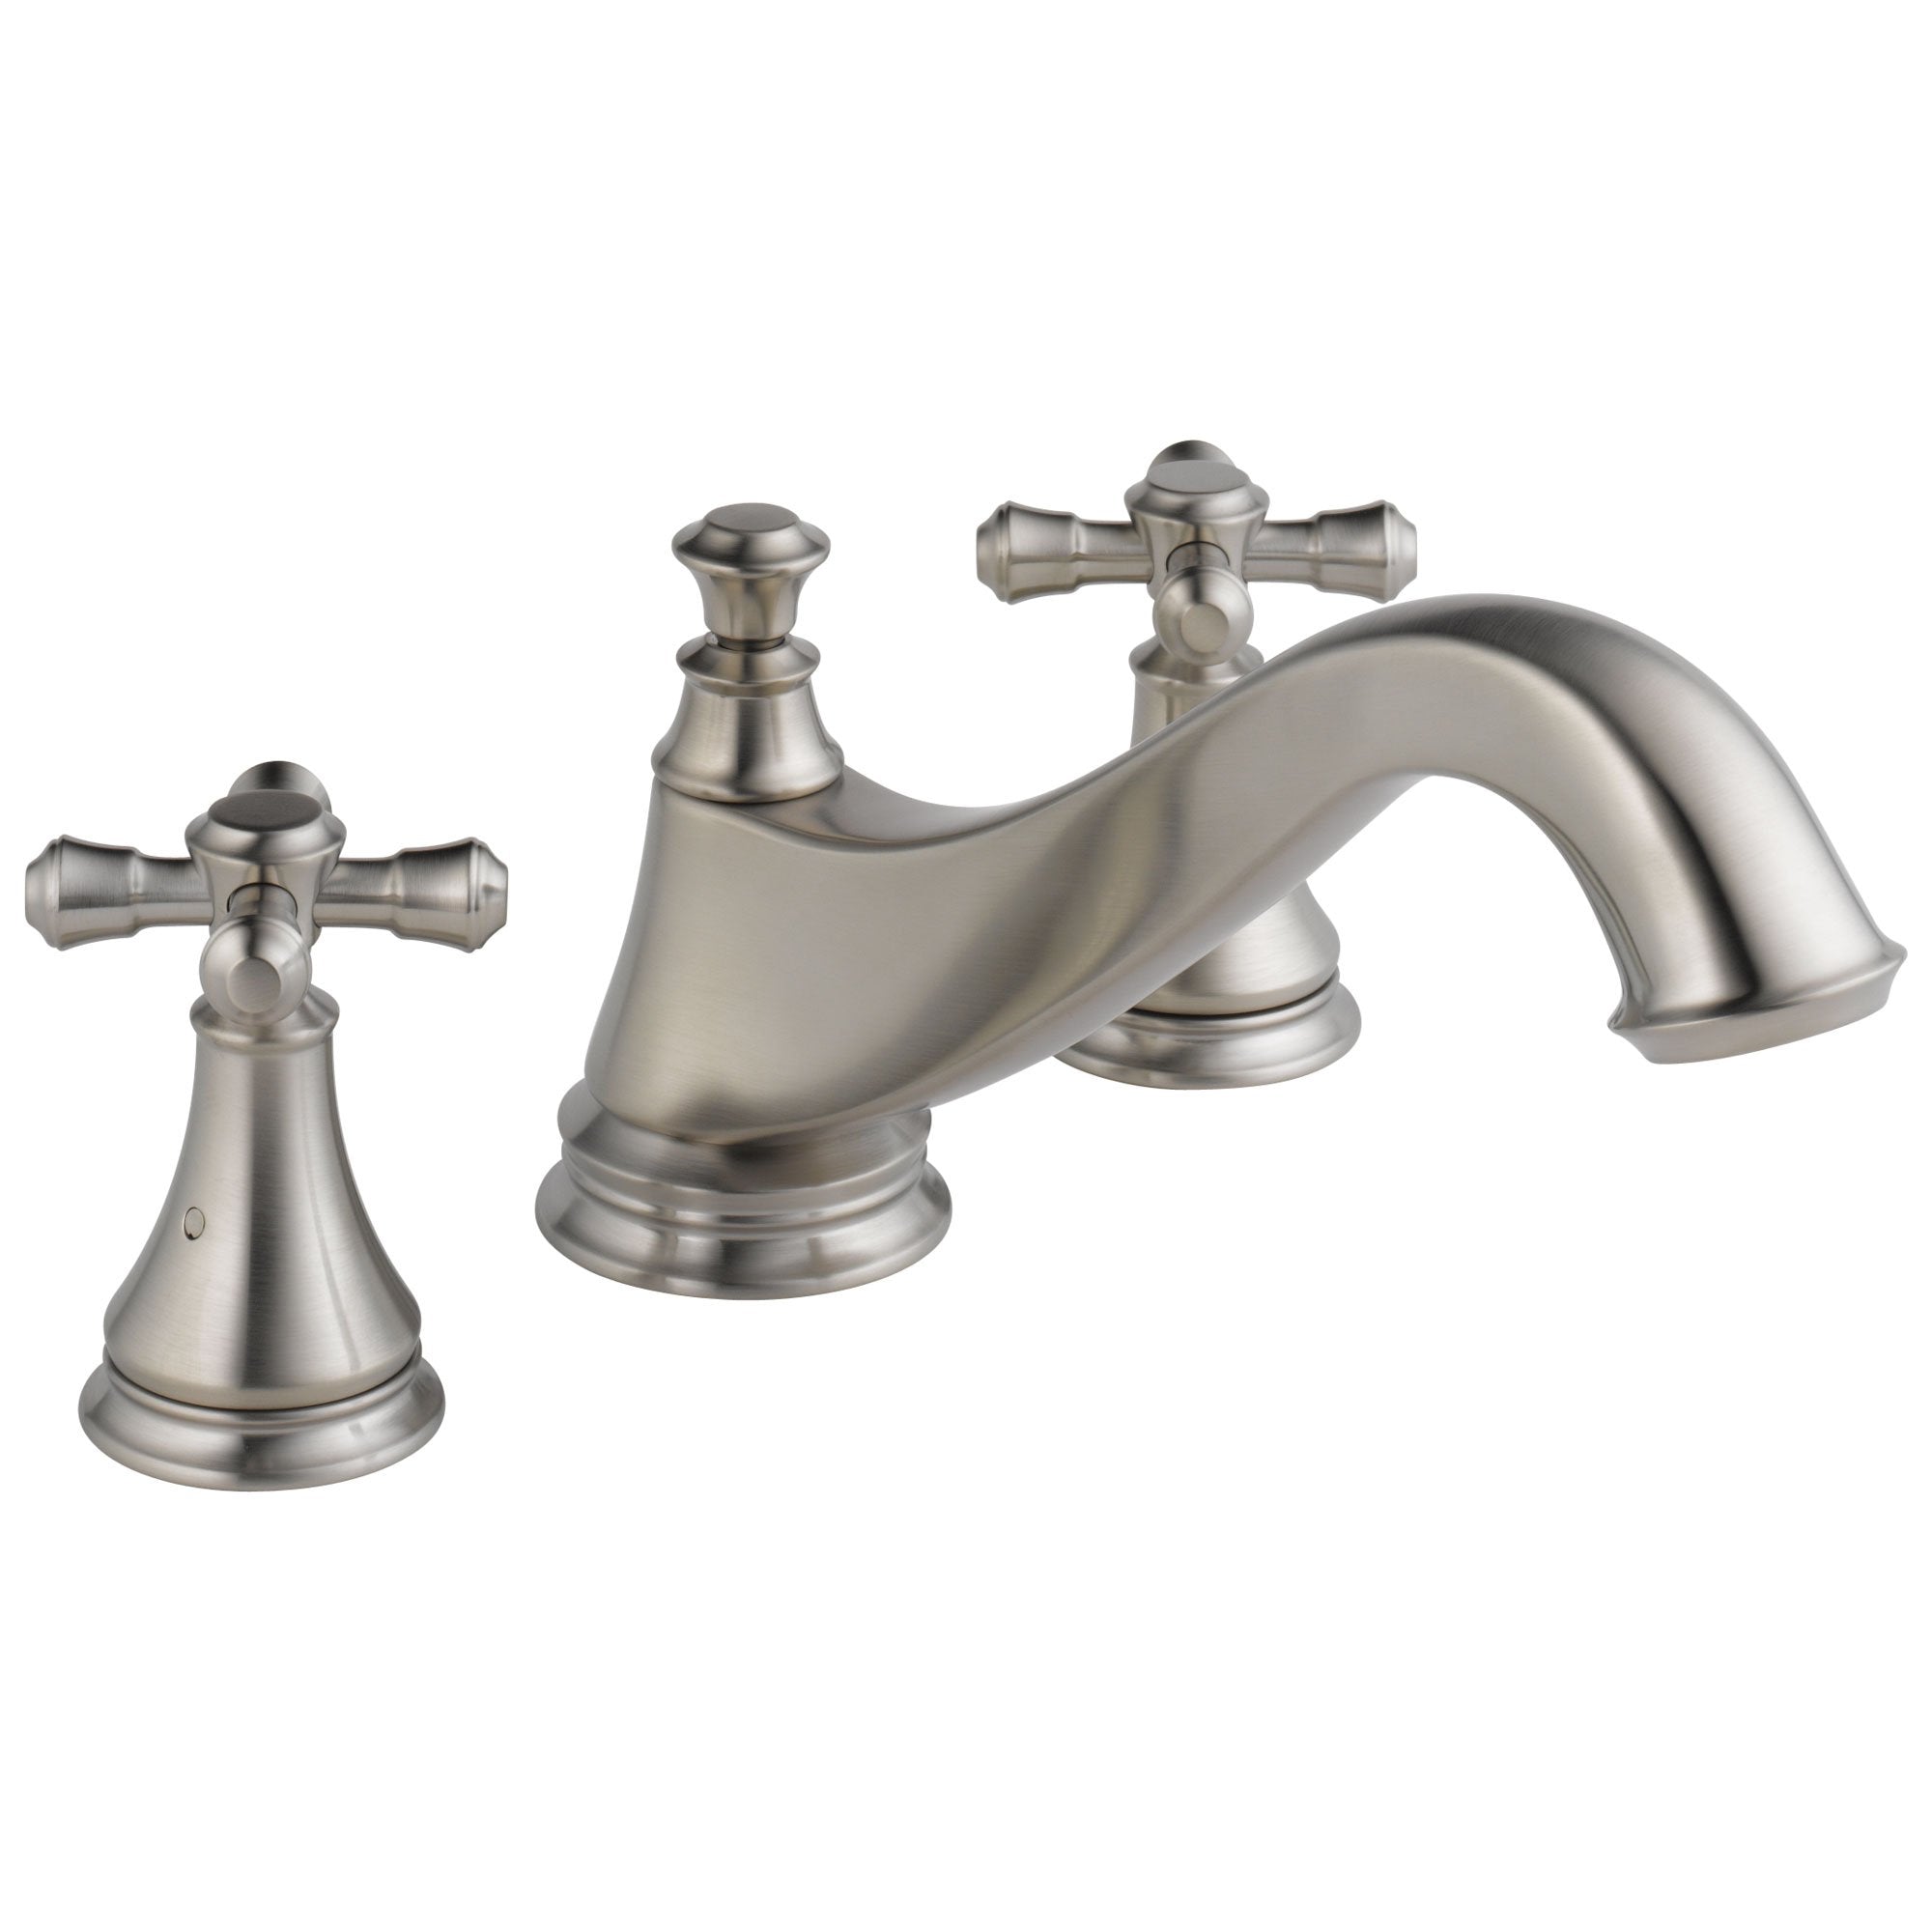 Delta Cassidy Collection Stainless Steel Finish Traditional Spout Roman Tub Filler Faucet COMPLETE ITEM Includes (2) Cross Handles and Rough-in Valve D1442V